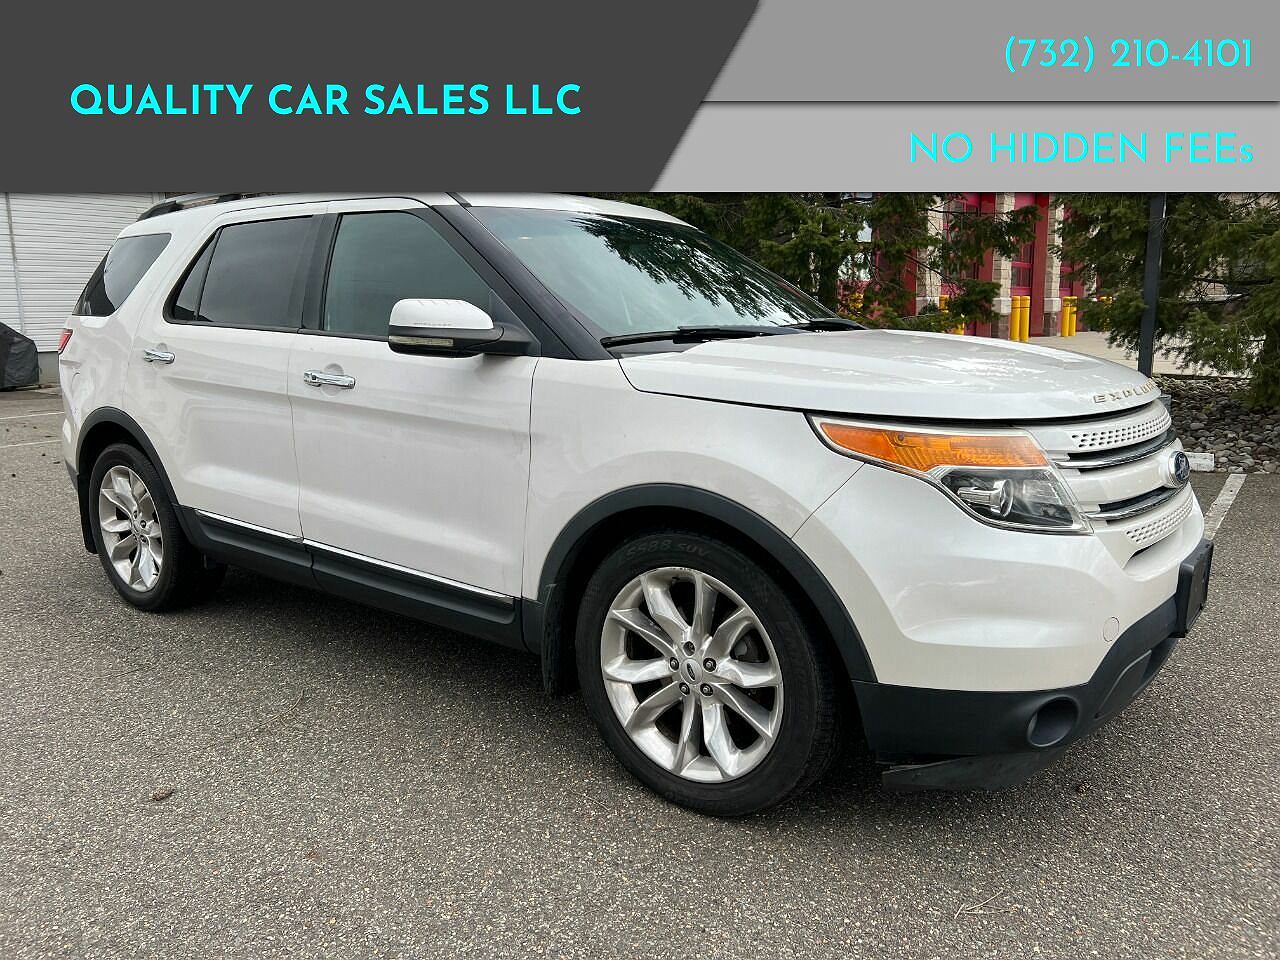 2012 Ford Explorer Limited Edition image 0